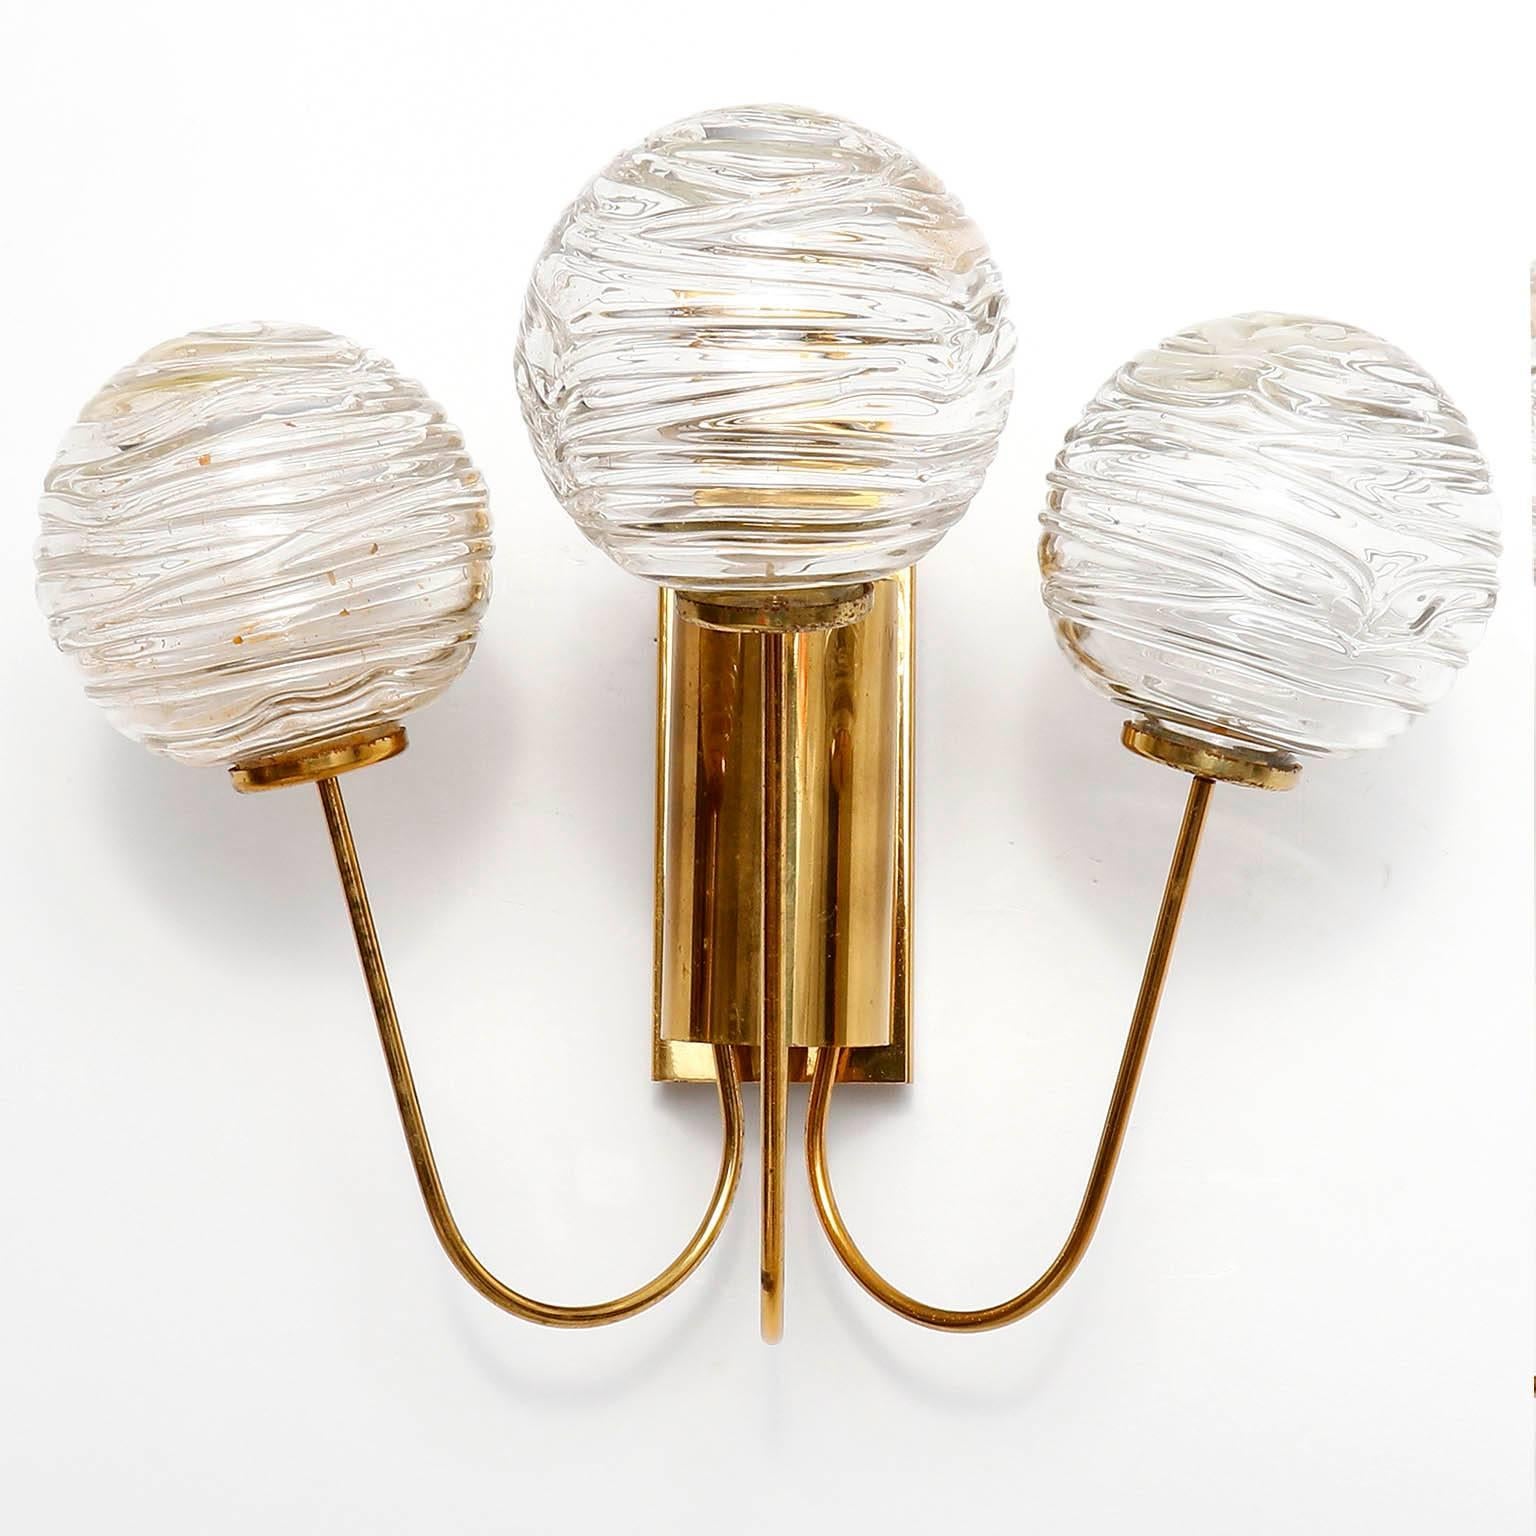 A pair of wall lamps by Doria Leuchten, Germany, manufactured in Mid-Century, circa 1960.
They are made of a brass frame which holds 3 hand blown glass balls with a diameter of 3.2